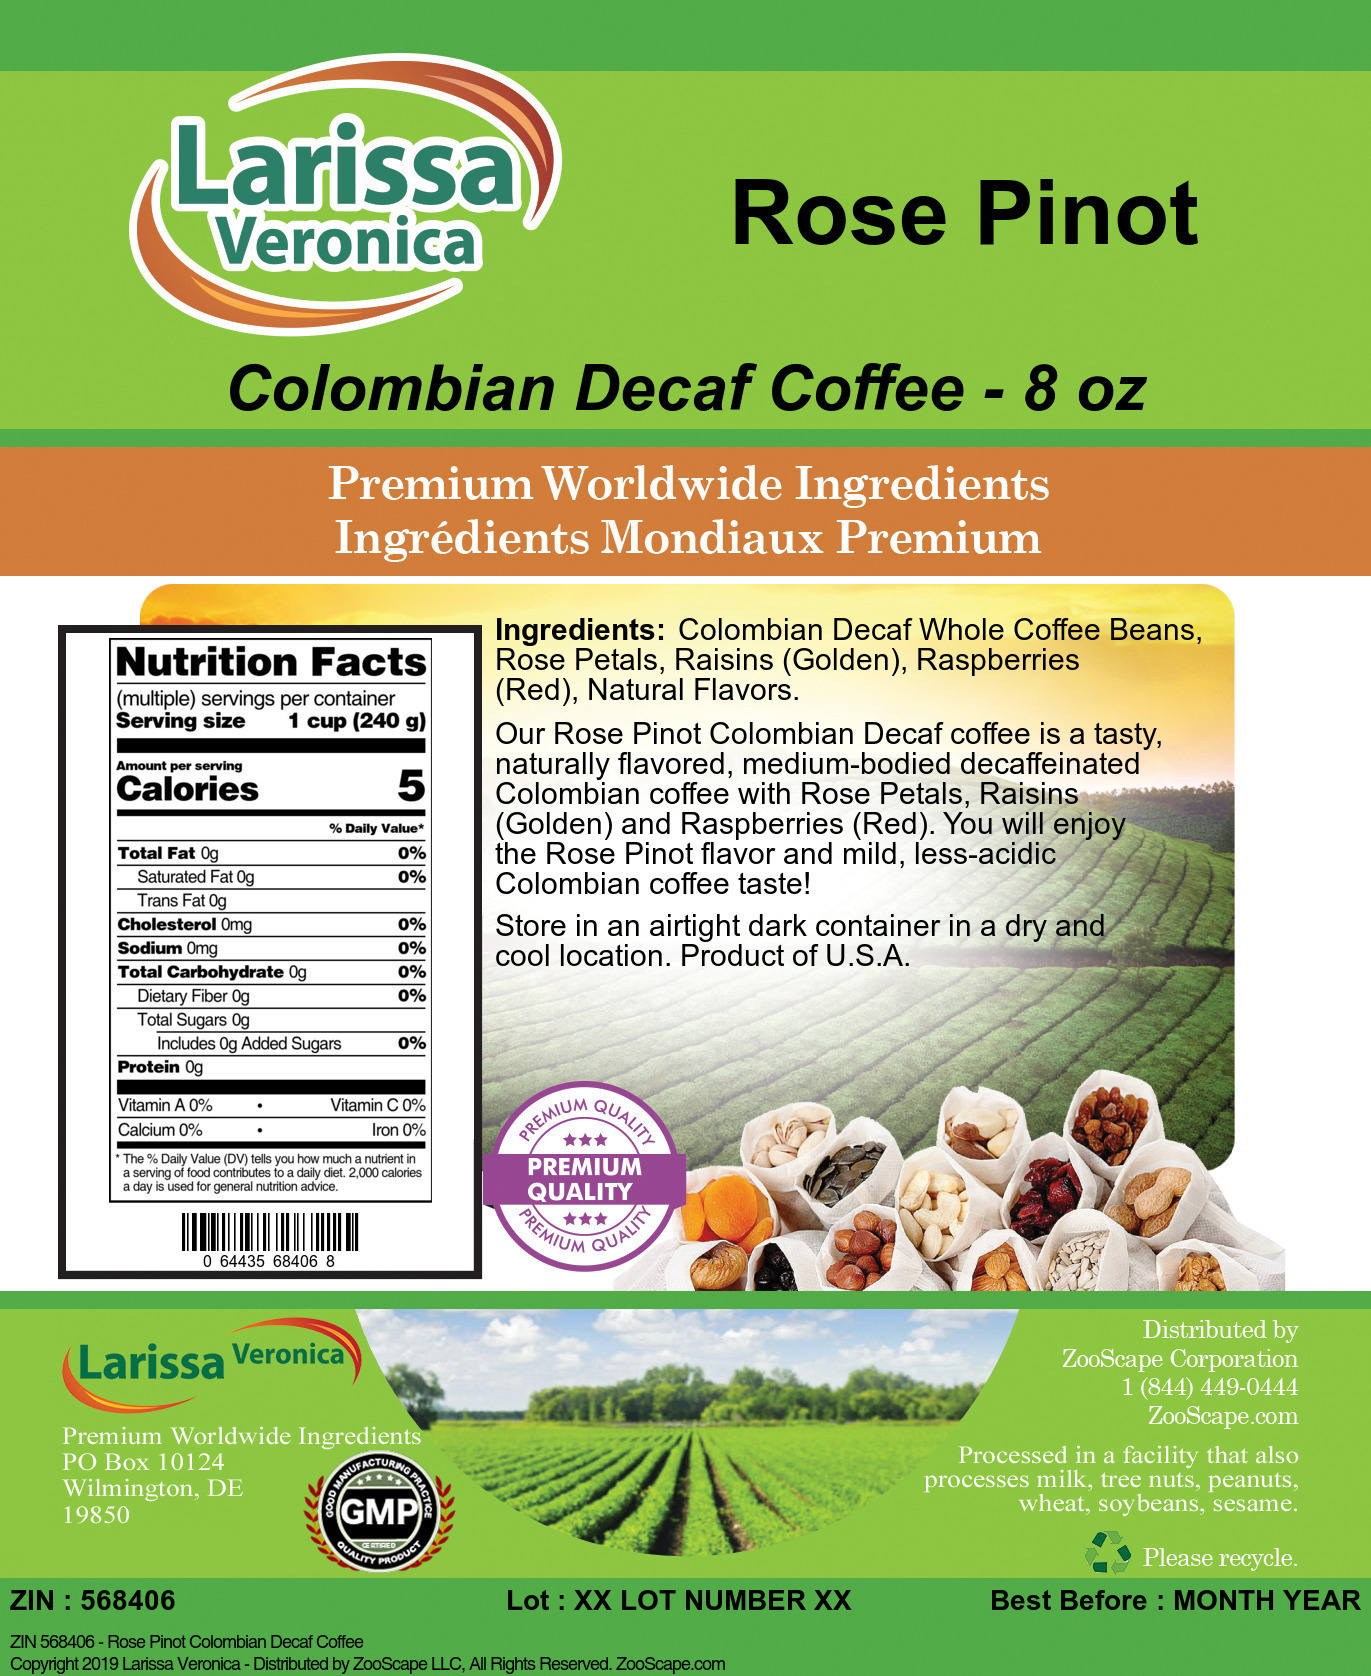 Rose Pinot Colombian Decaf Coffee - Label